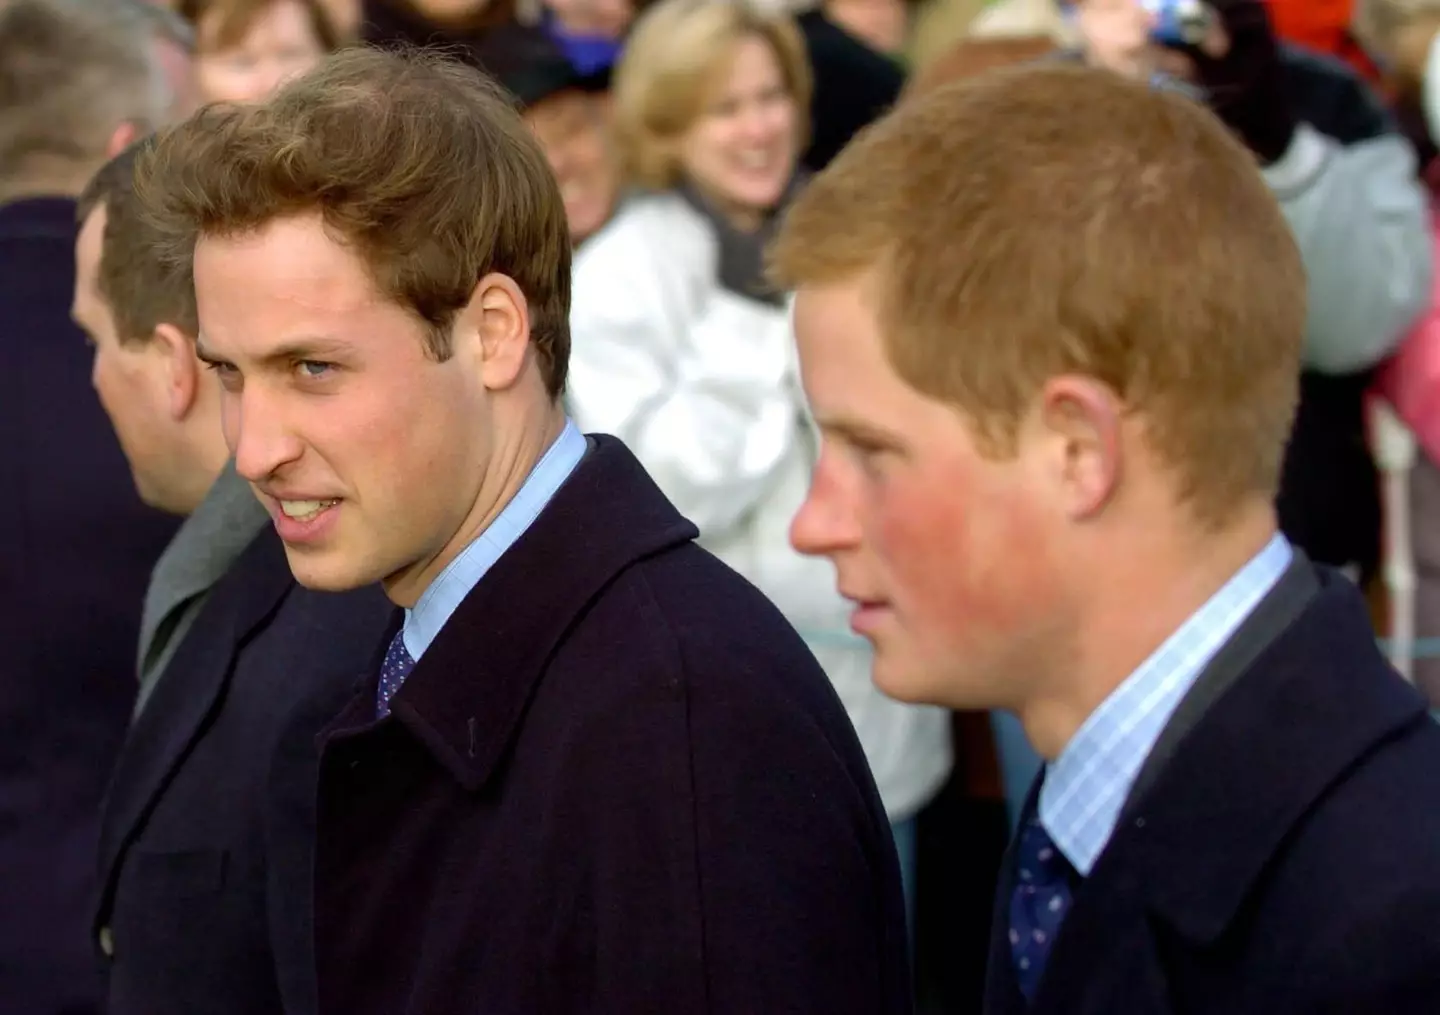 Prince William and Prince Harry pictured in December 2005.